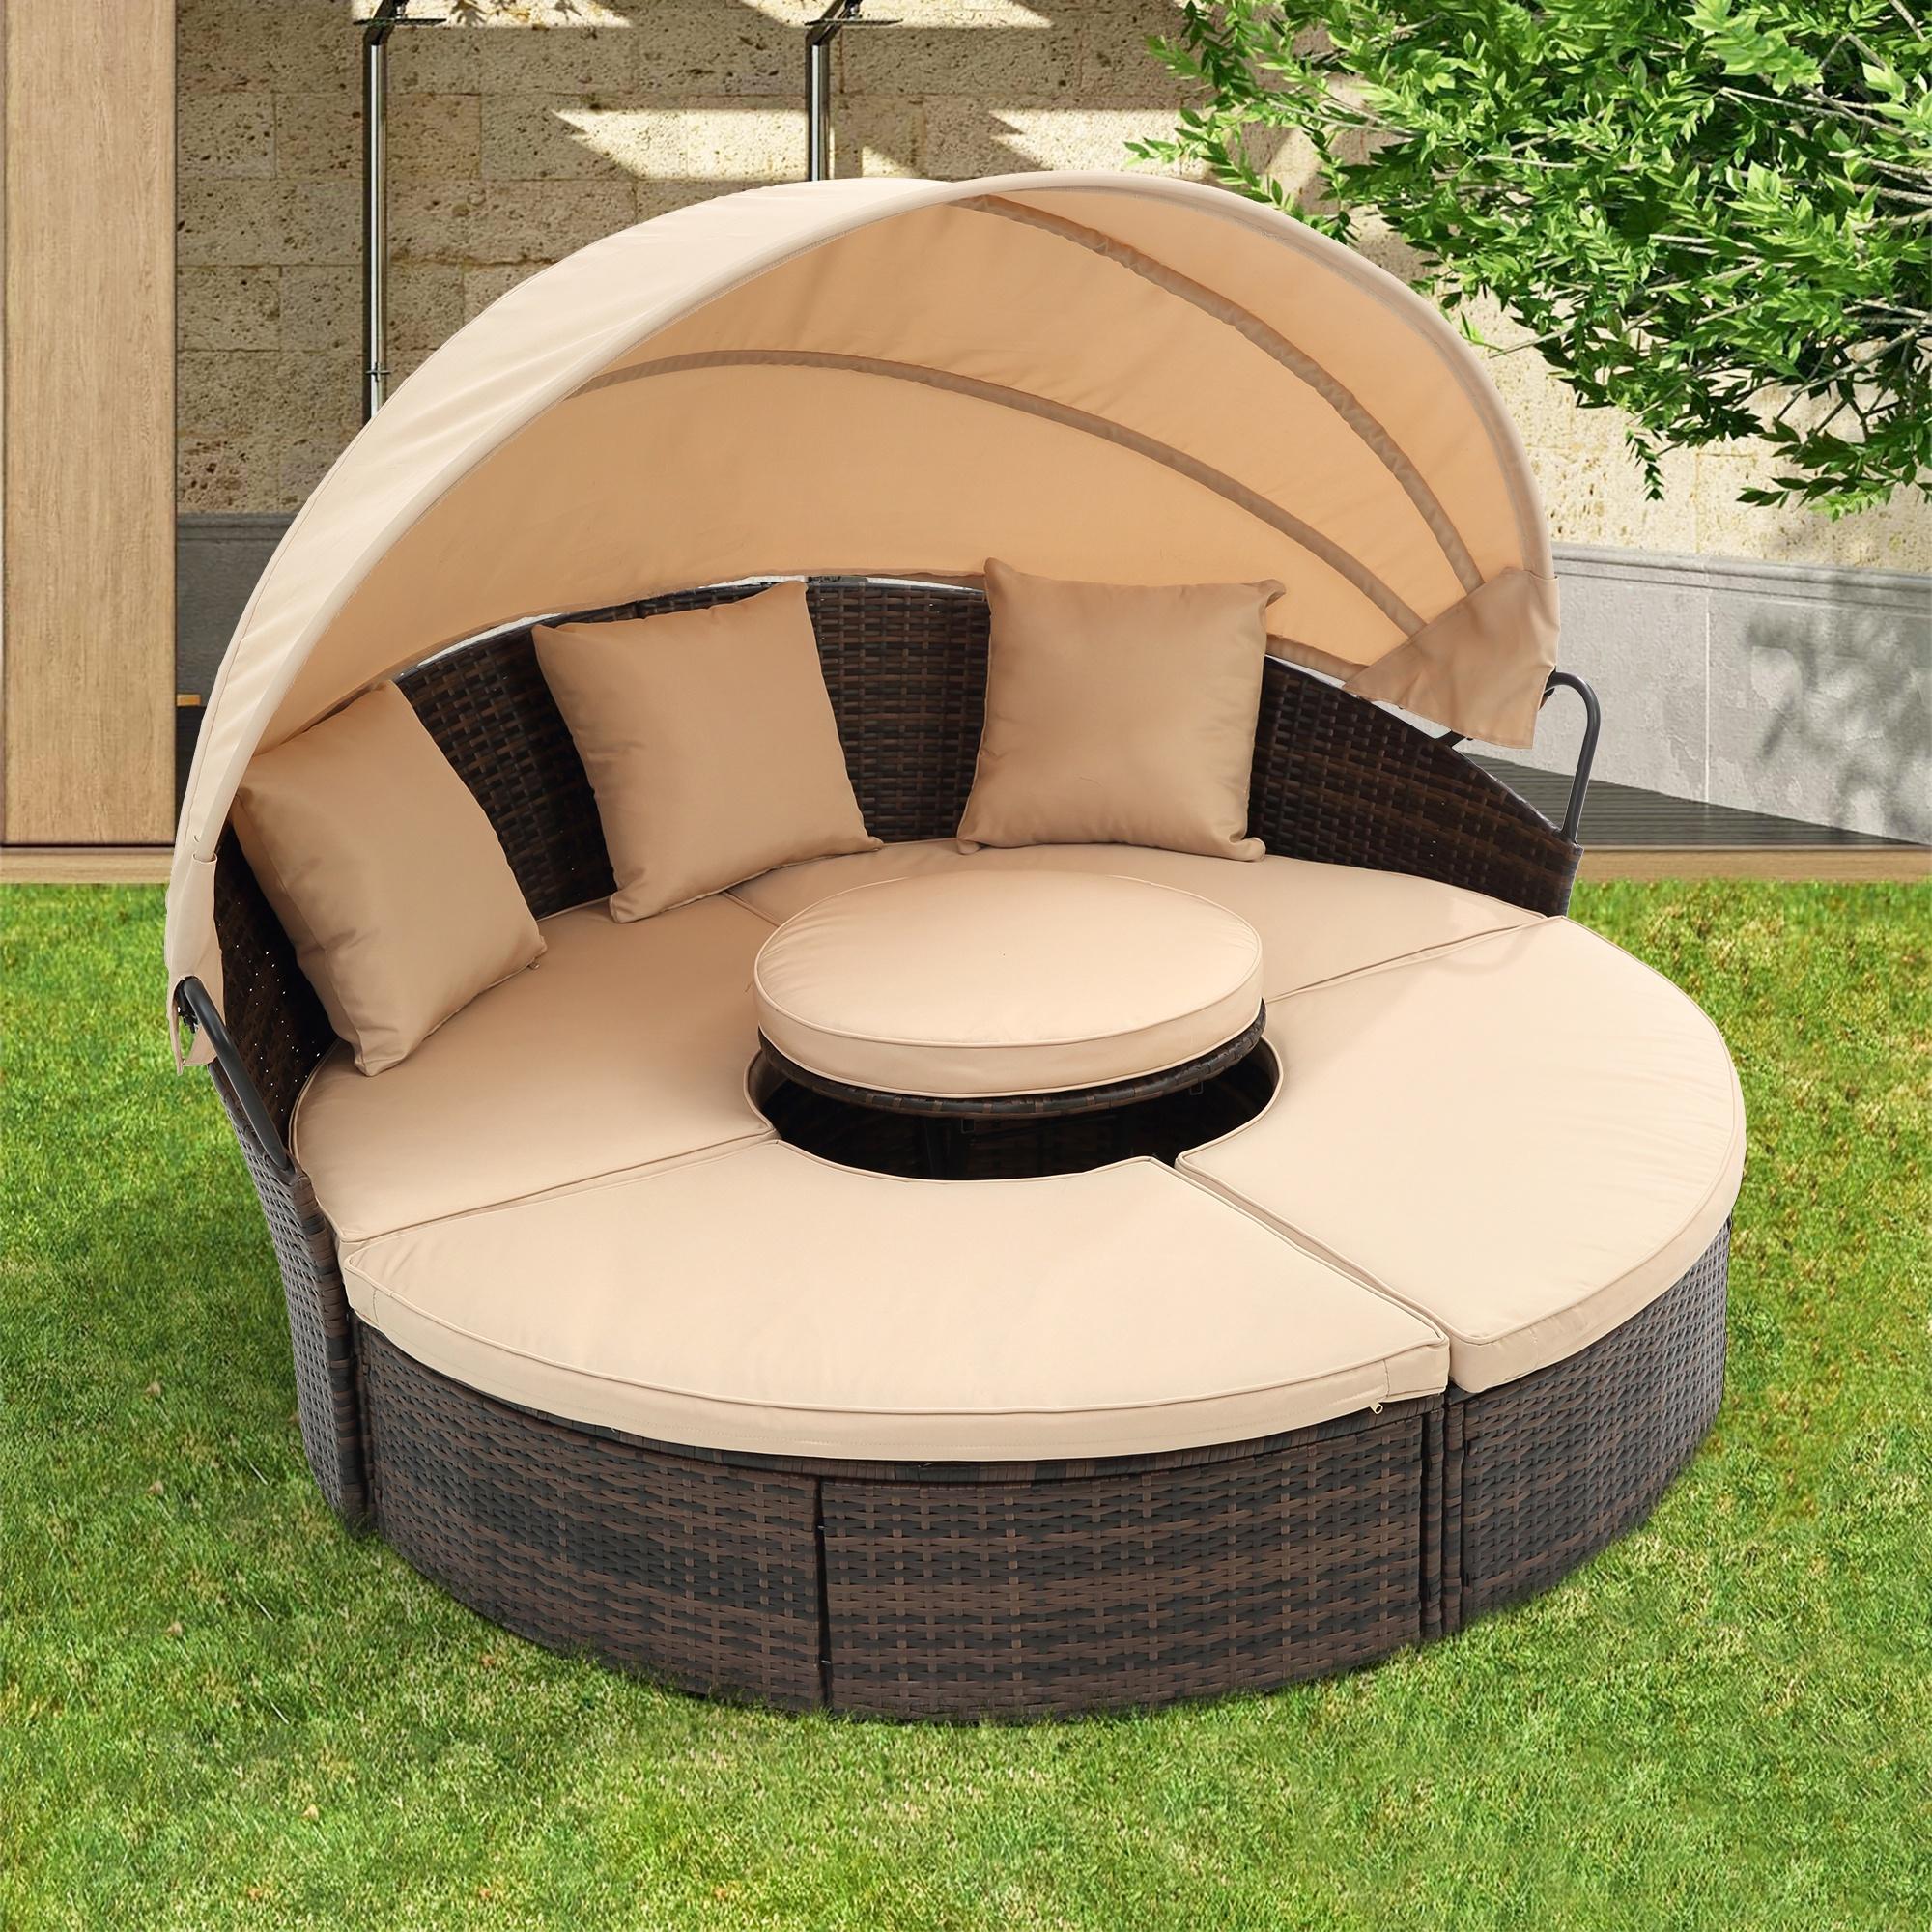 SYNGAR 6 Pieces Outdoor Sunbed Daybed Set with Canopy, Patio Rattan Sectional Furniture Set with Coffee Table, Cushioned Wicker Conversation Sofa Set for Backyard, Deck, Poolside, Garden, Beige, D6308 - image 1 of 10